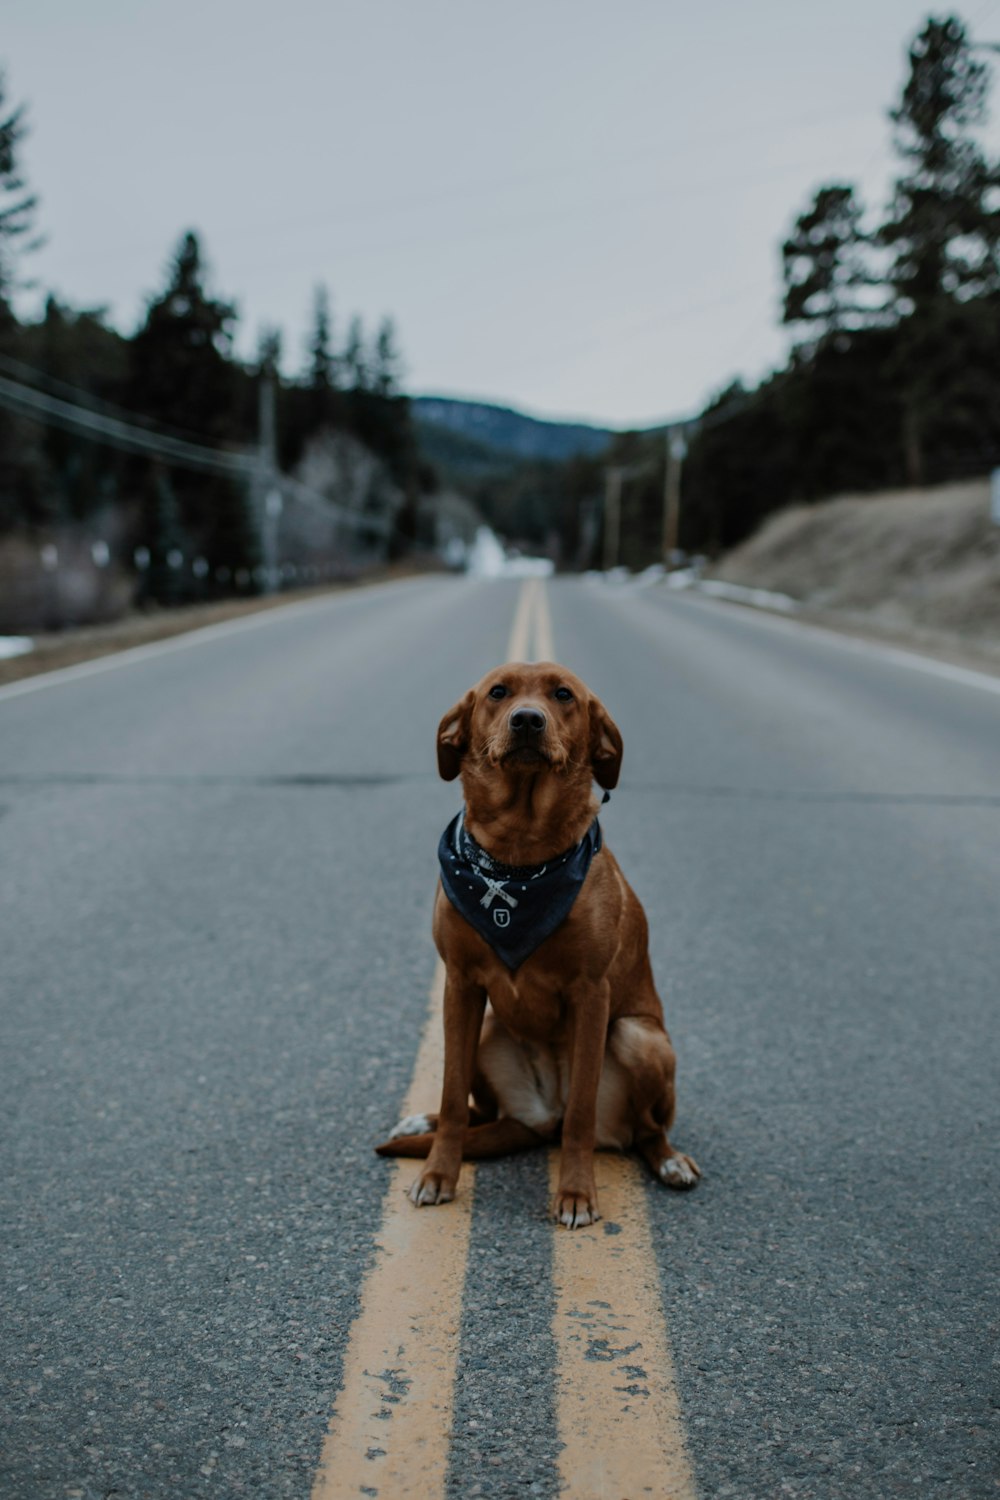 brown dog sitting on paved road